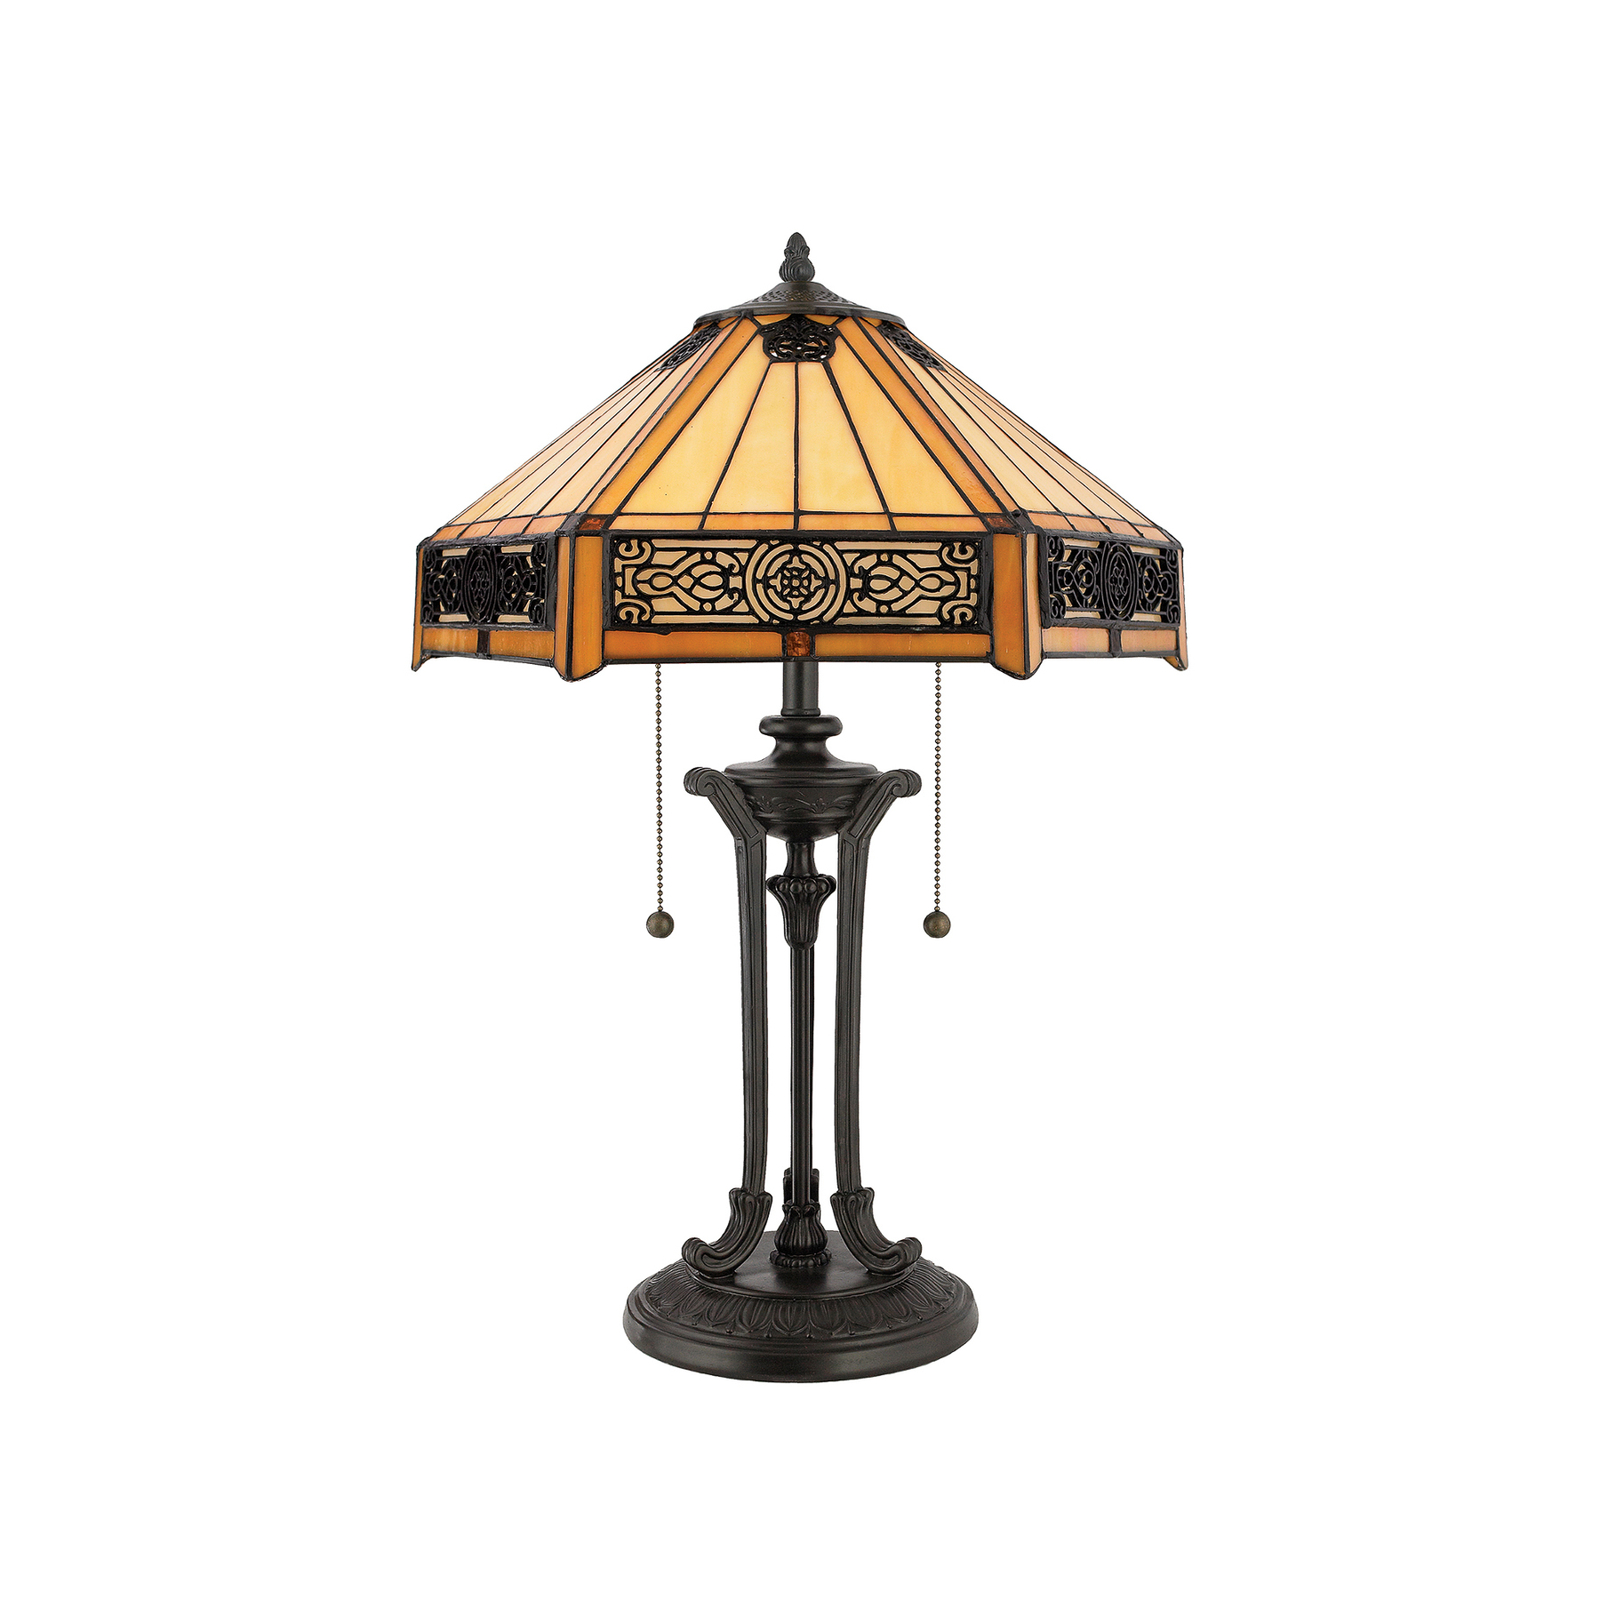 Indus table lamp in a Tiffany style